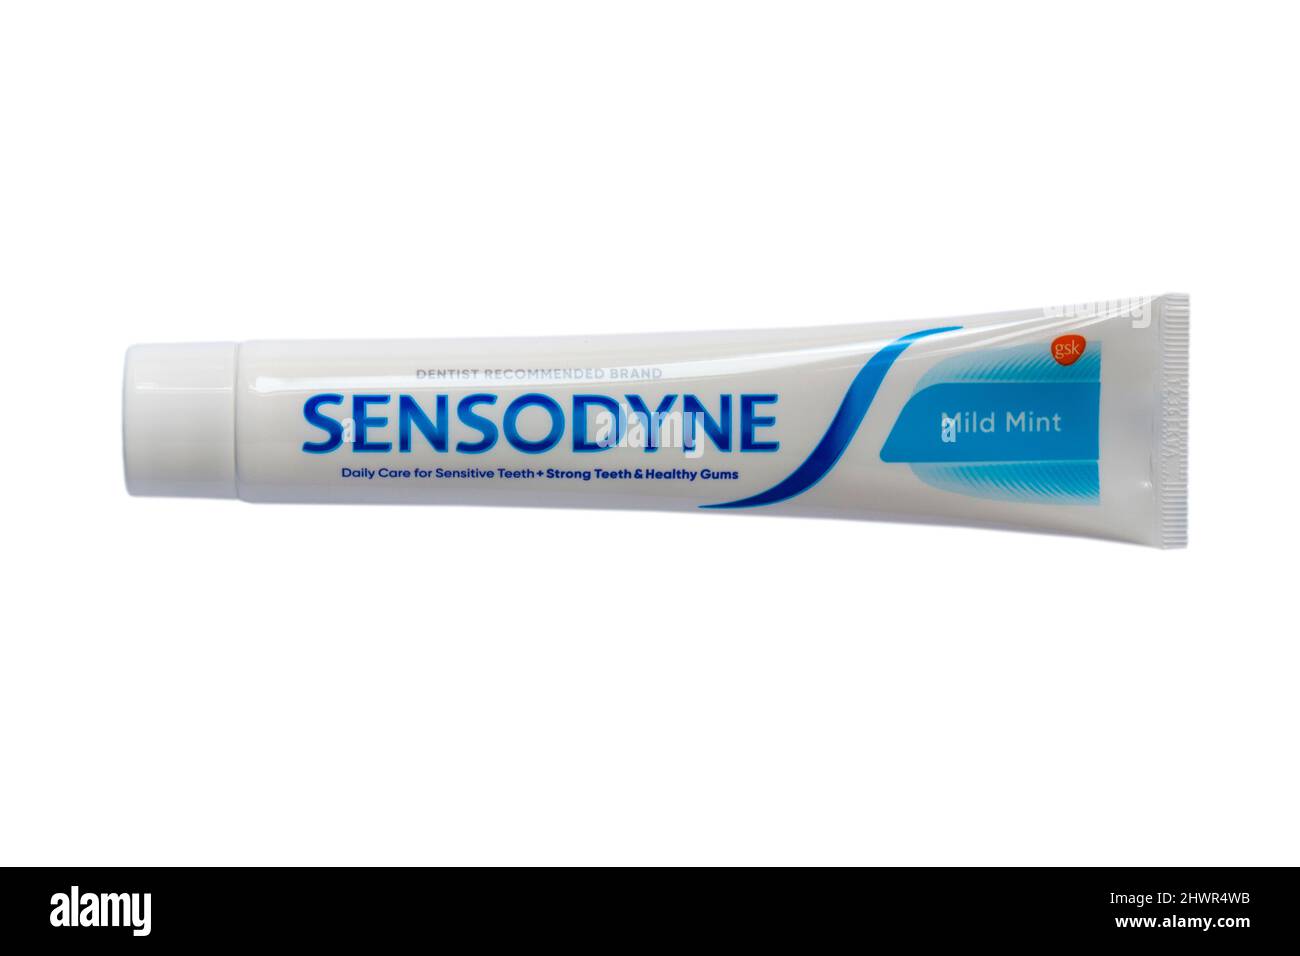 Sensodyne Toothpaste High Resolution Stock Photography and Images - Alamy